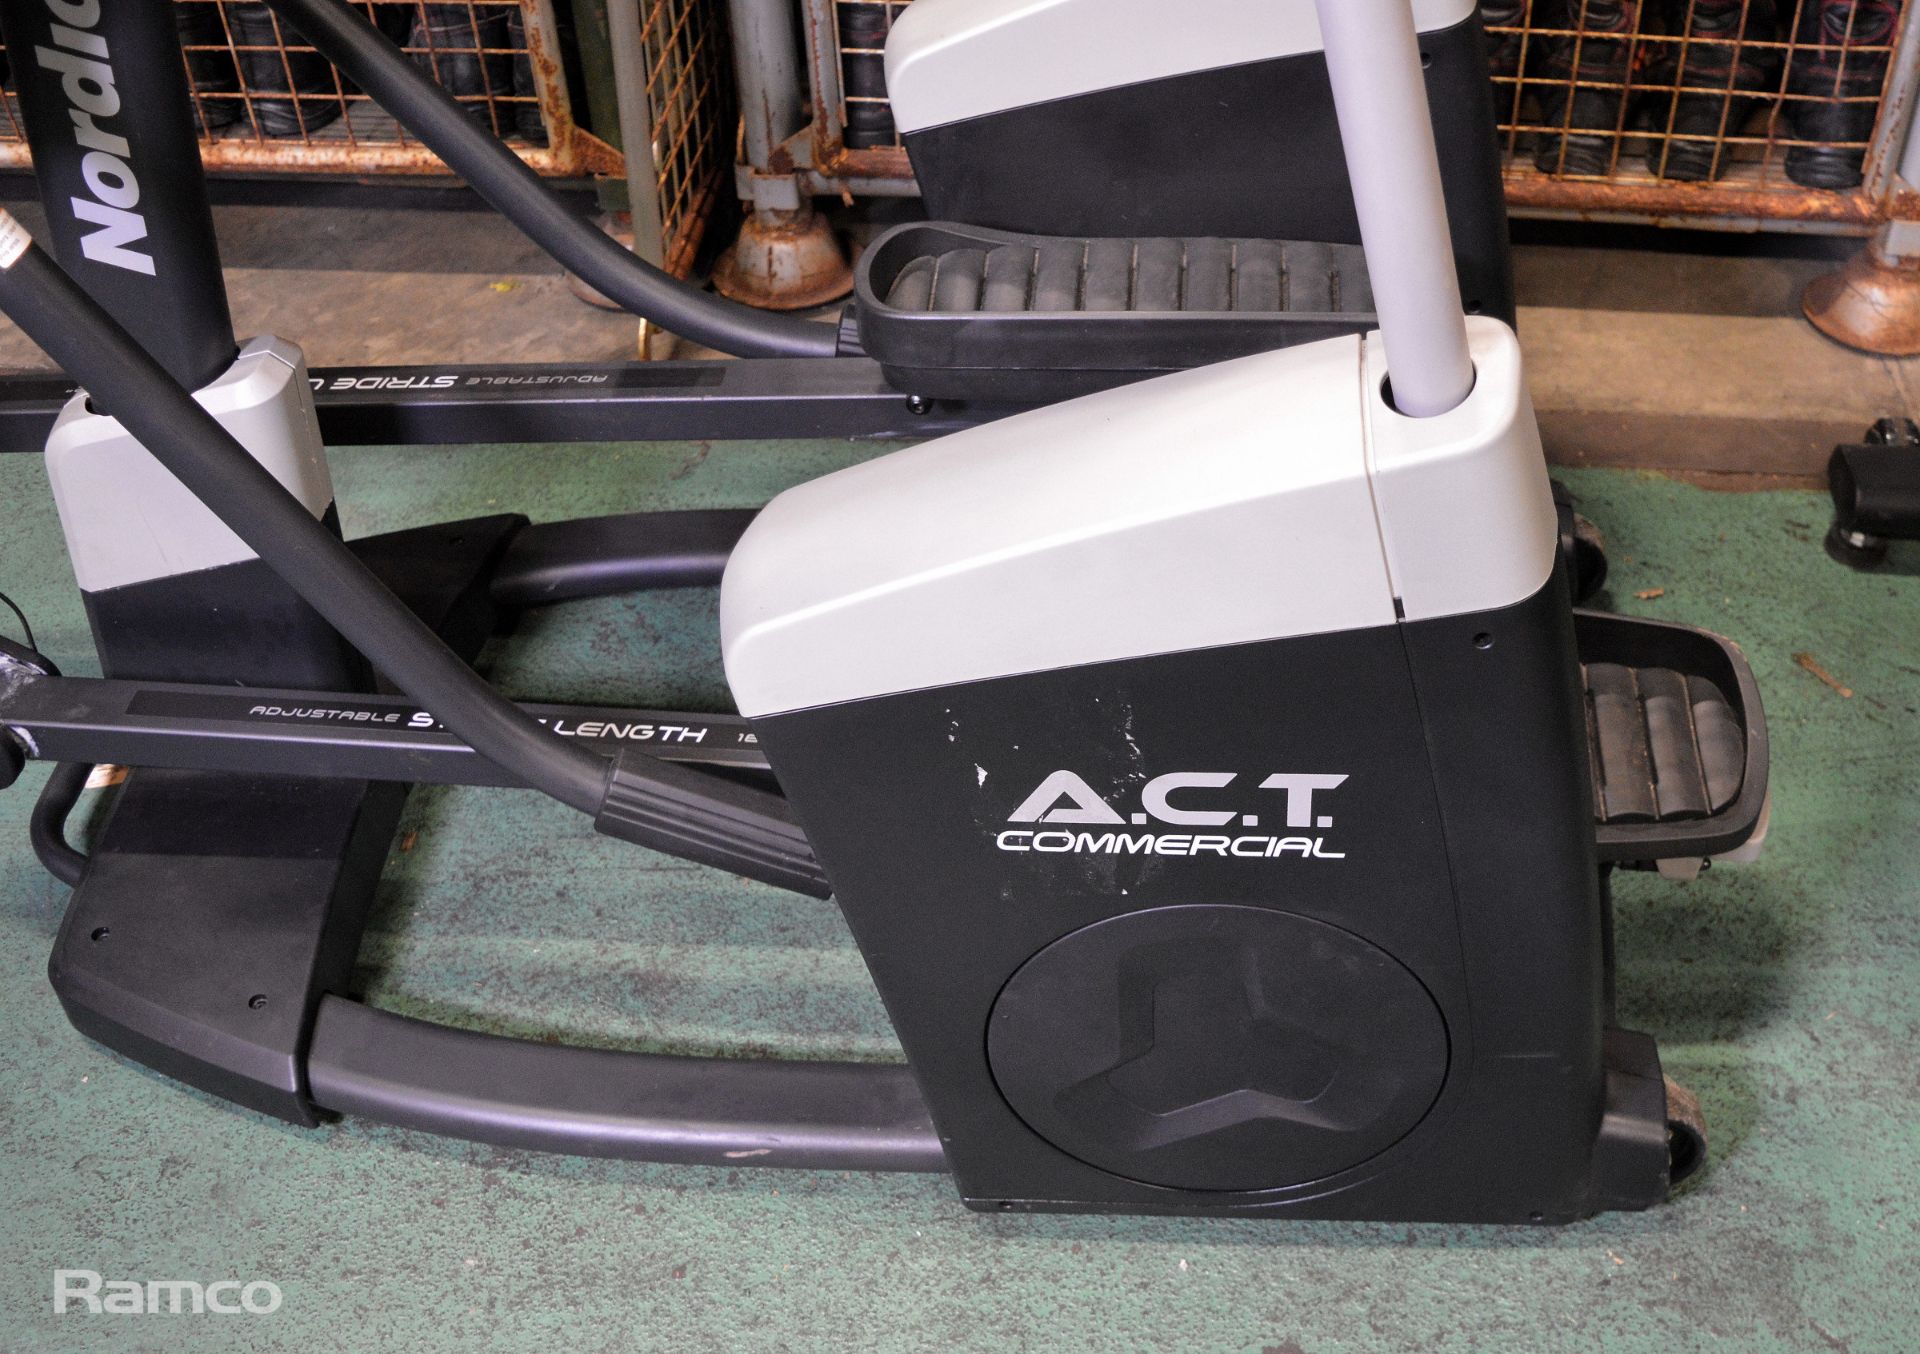 NordicTrack ACT Elliptical Cross Trainer - stride length - Image 5 of 7